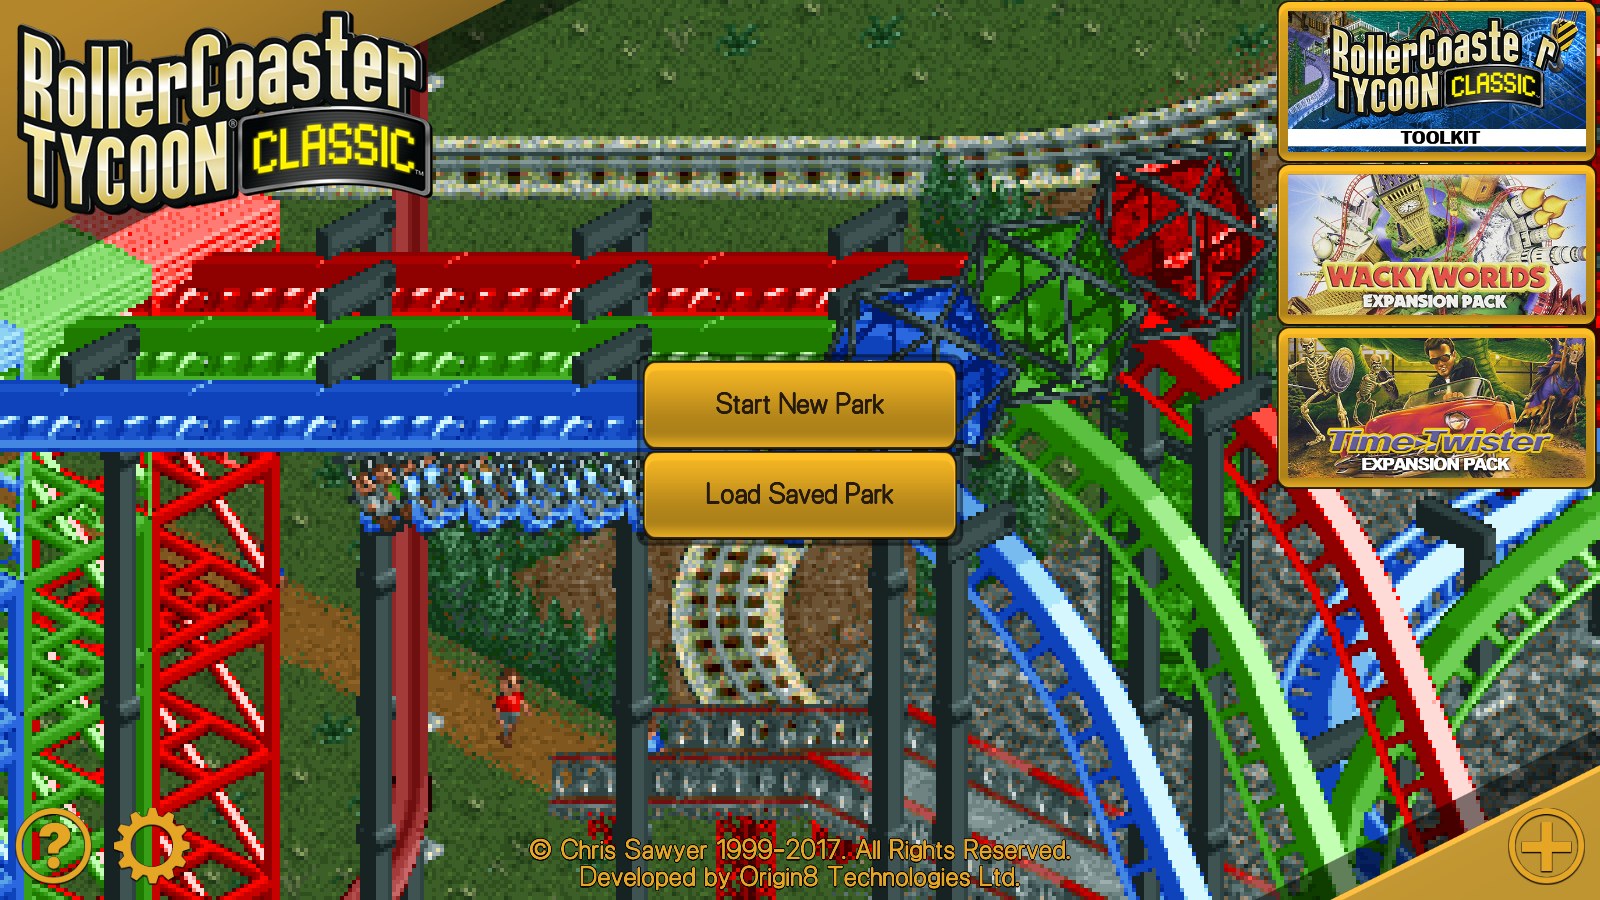 RollerCoaster Tycoon® Classic APK - Free download for Android